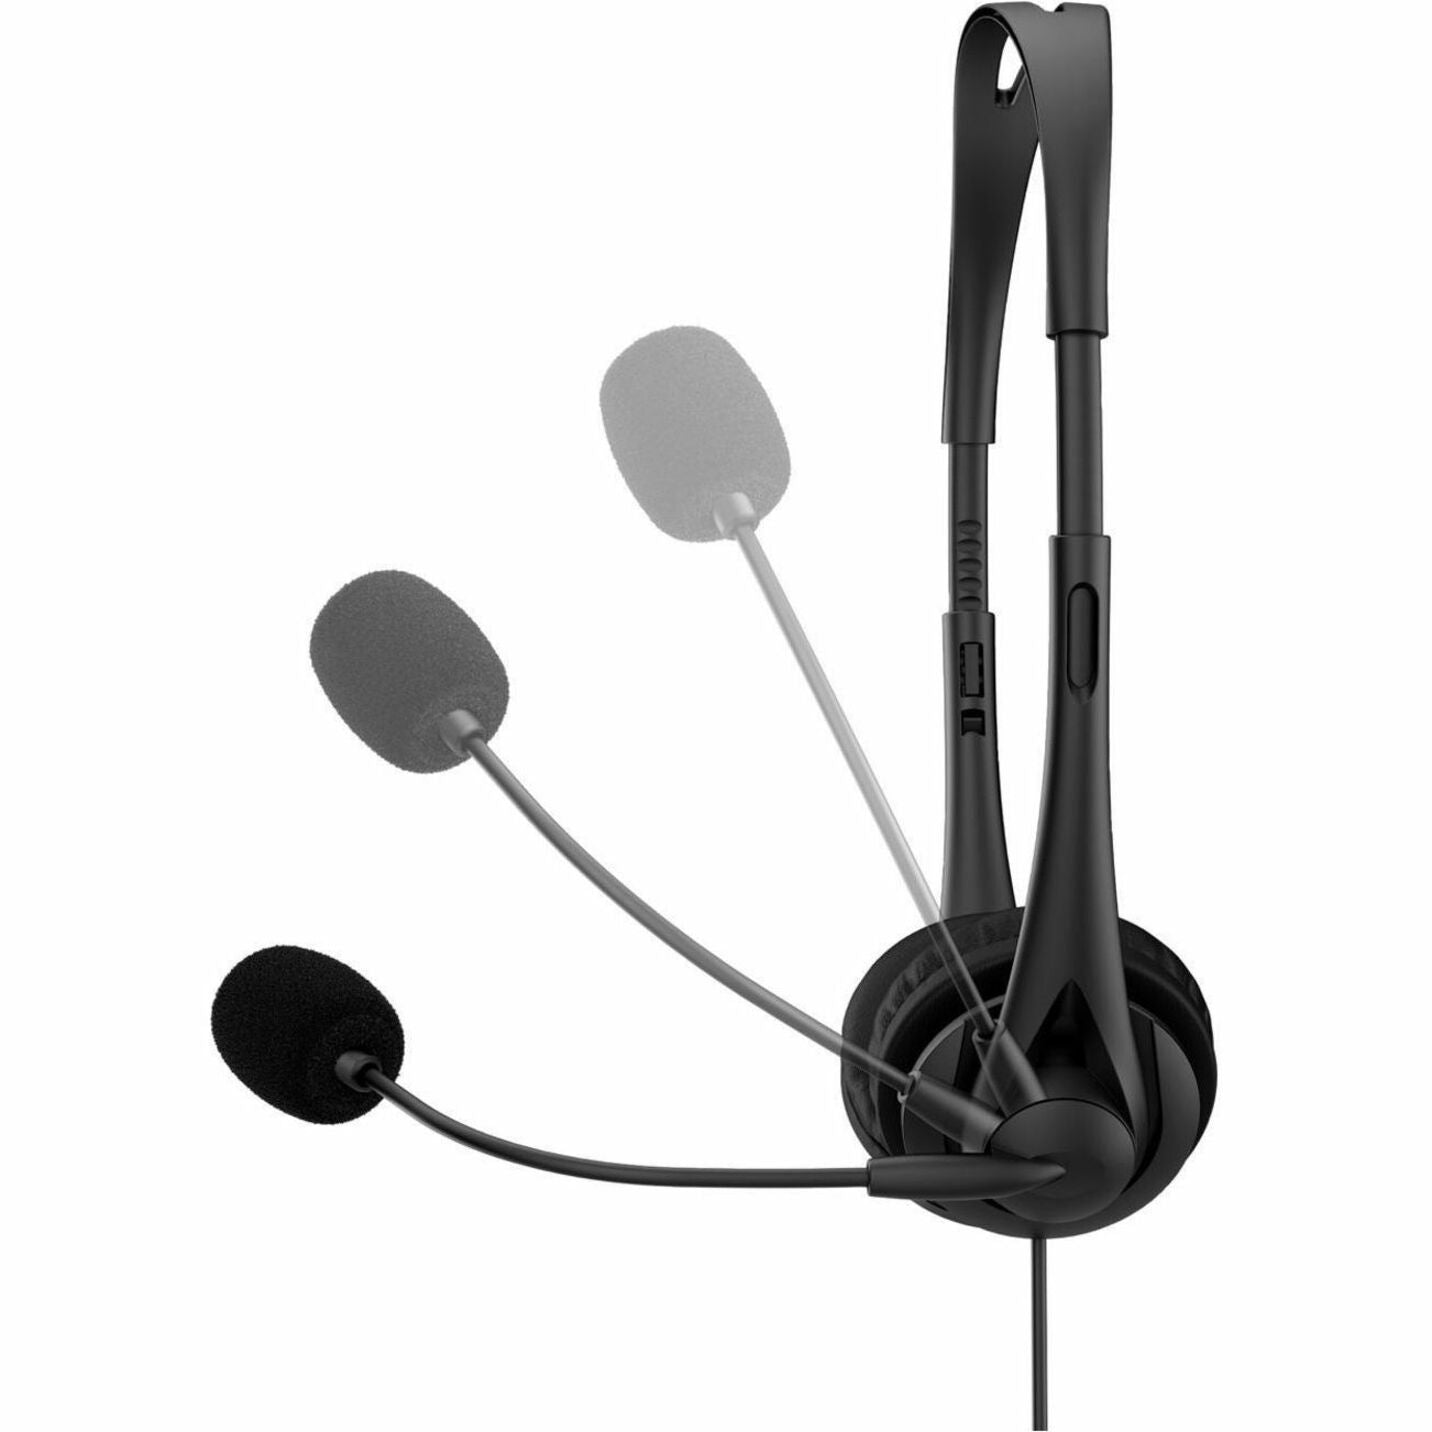 HP 428H5AA#ABL Stereo USB Headset G2, Comfortable, Adjustable Strap, Durable, In-Line Volume Control